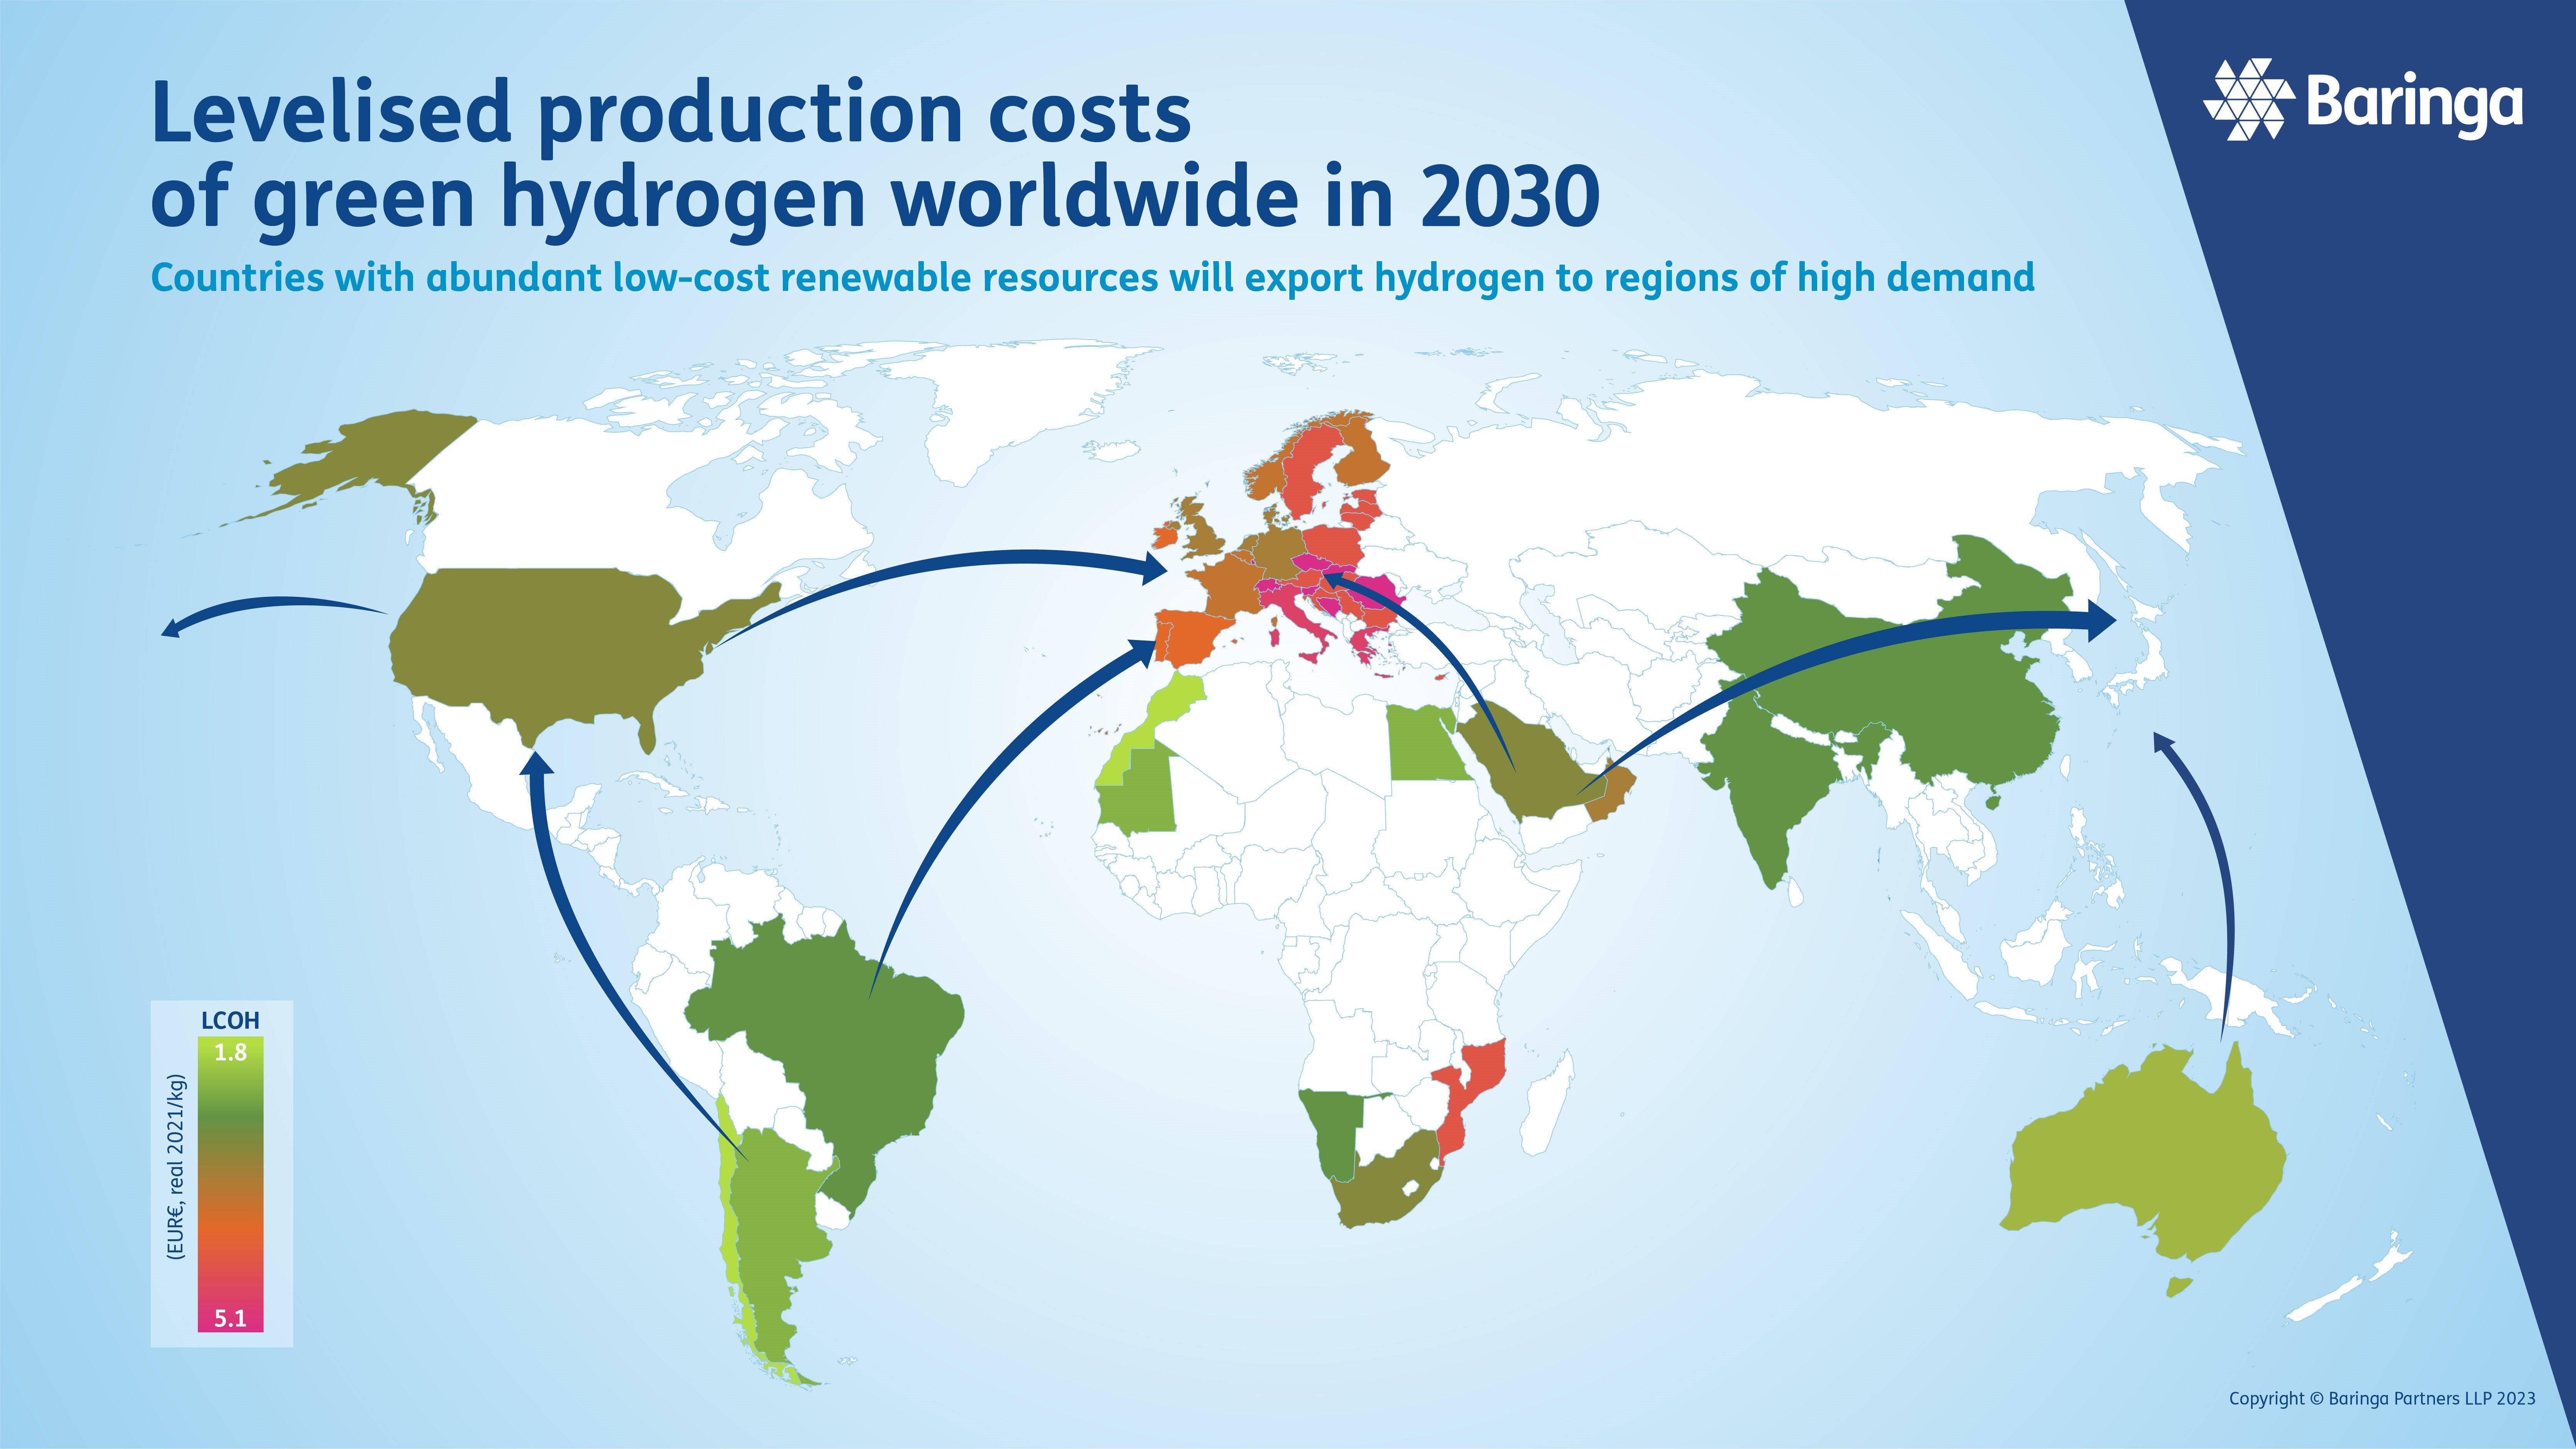 Map showing levelised production costs of green hydrogen